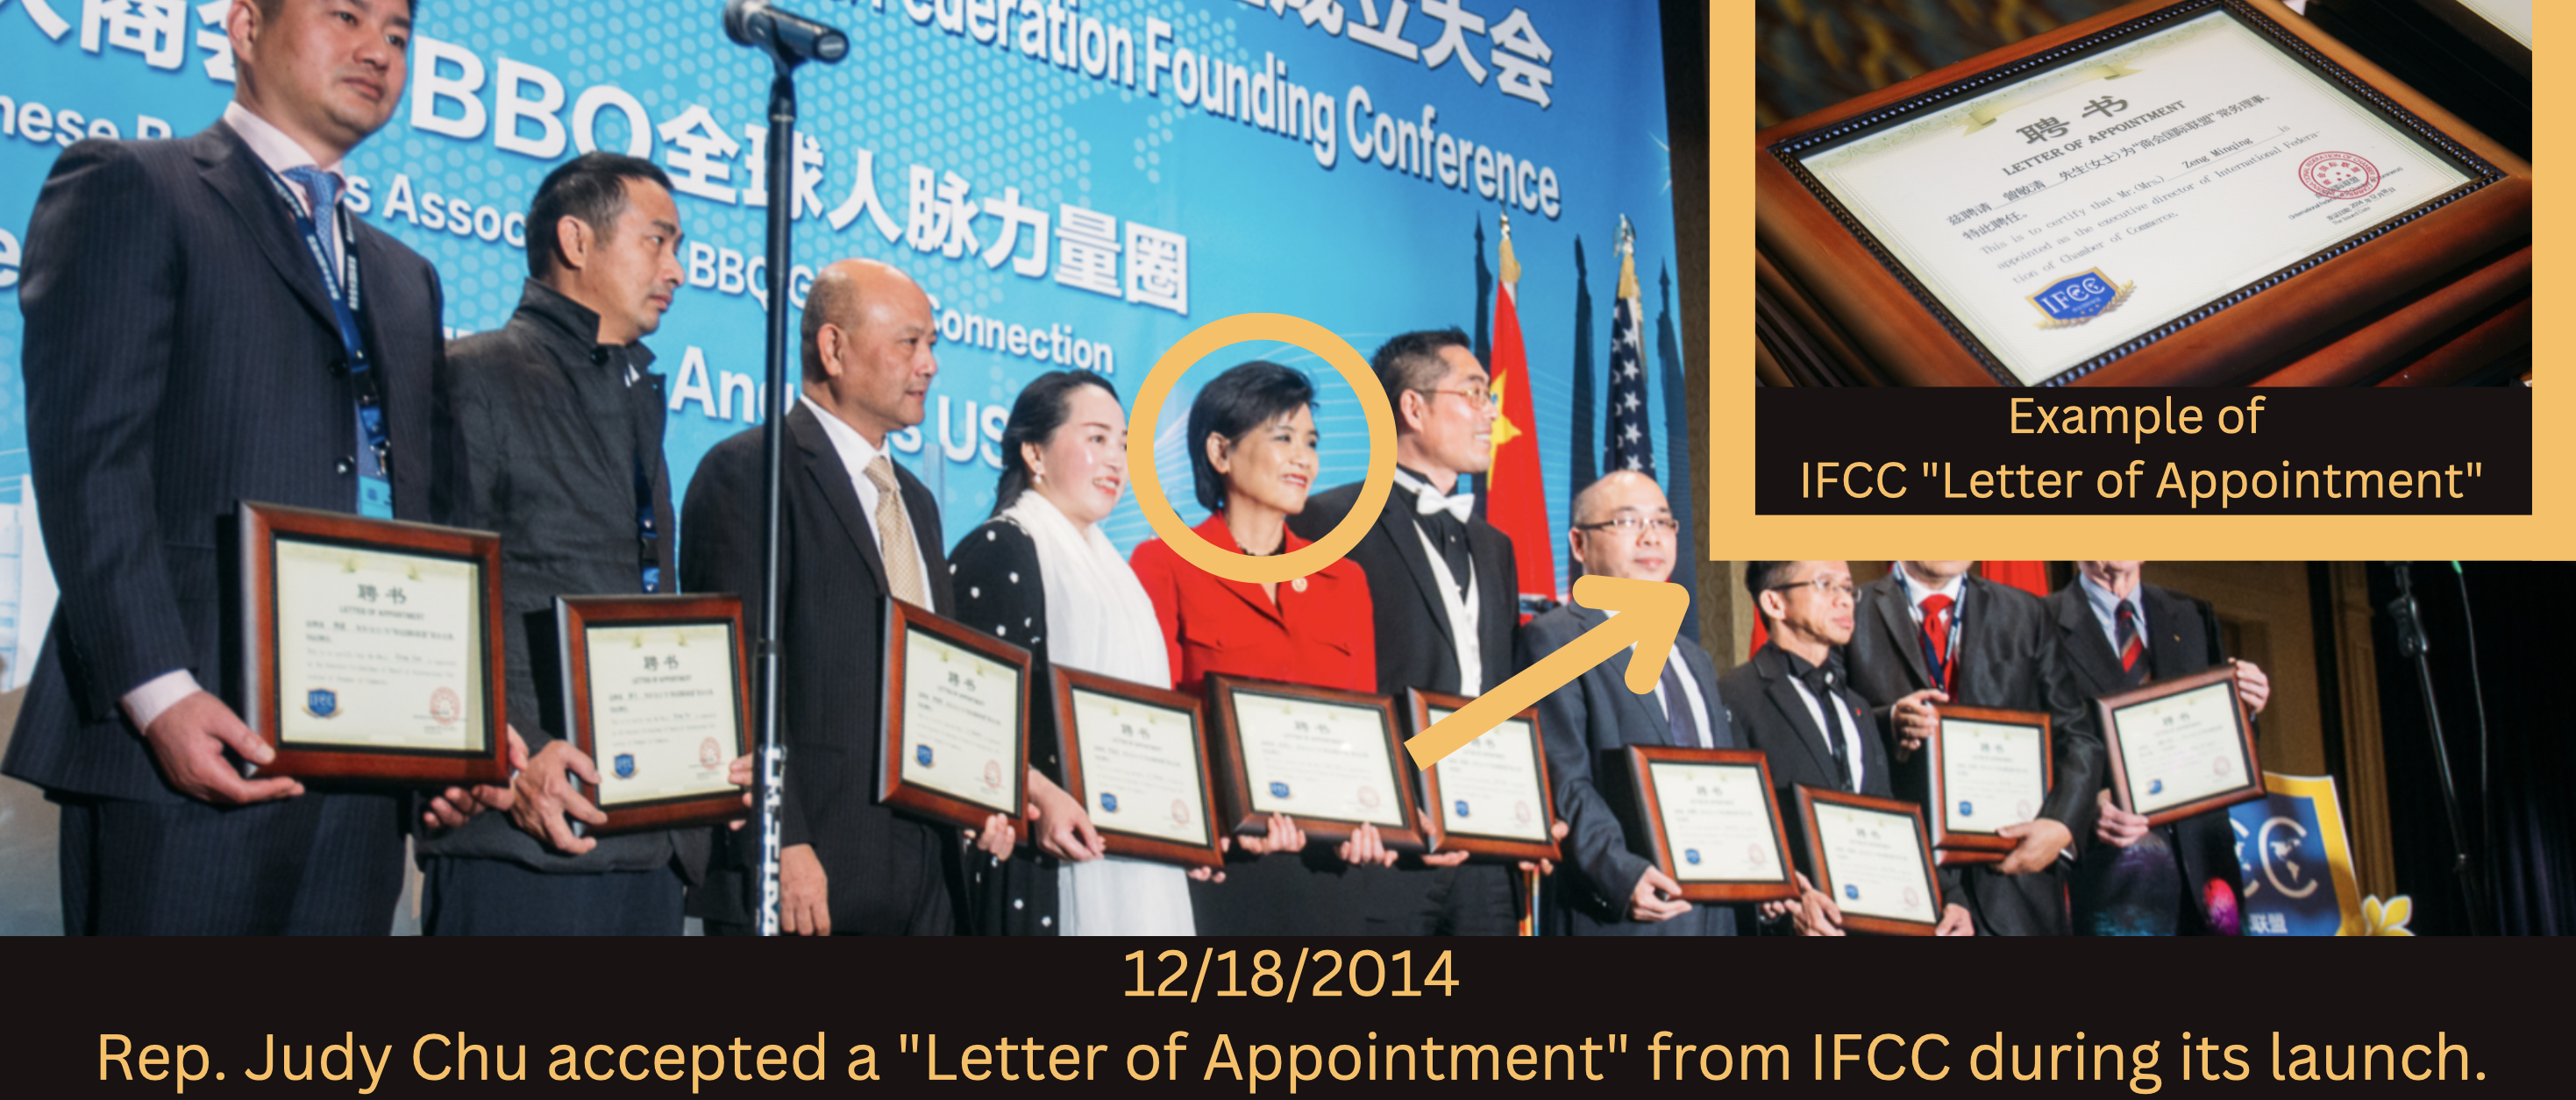 On Dec. 18, 2014, Rep. Judy Chu personally accepted a "Letter of Appointment" as "co-chair" on stage during the launch ceremony of the "International Federation of Chamber of Commerce" alongside the organization's other leadership. [Image created by the Daily Caller News Foundation using images from the website of U.S.-Chinese General Chamber of Commerce's website]